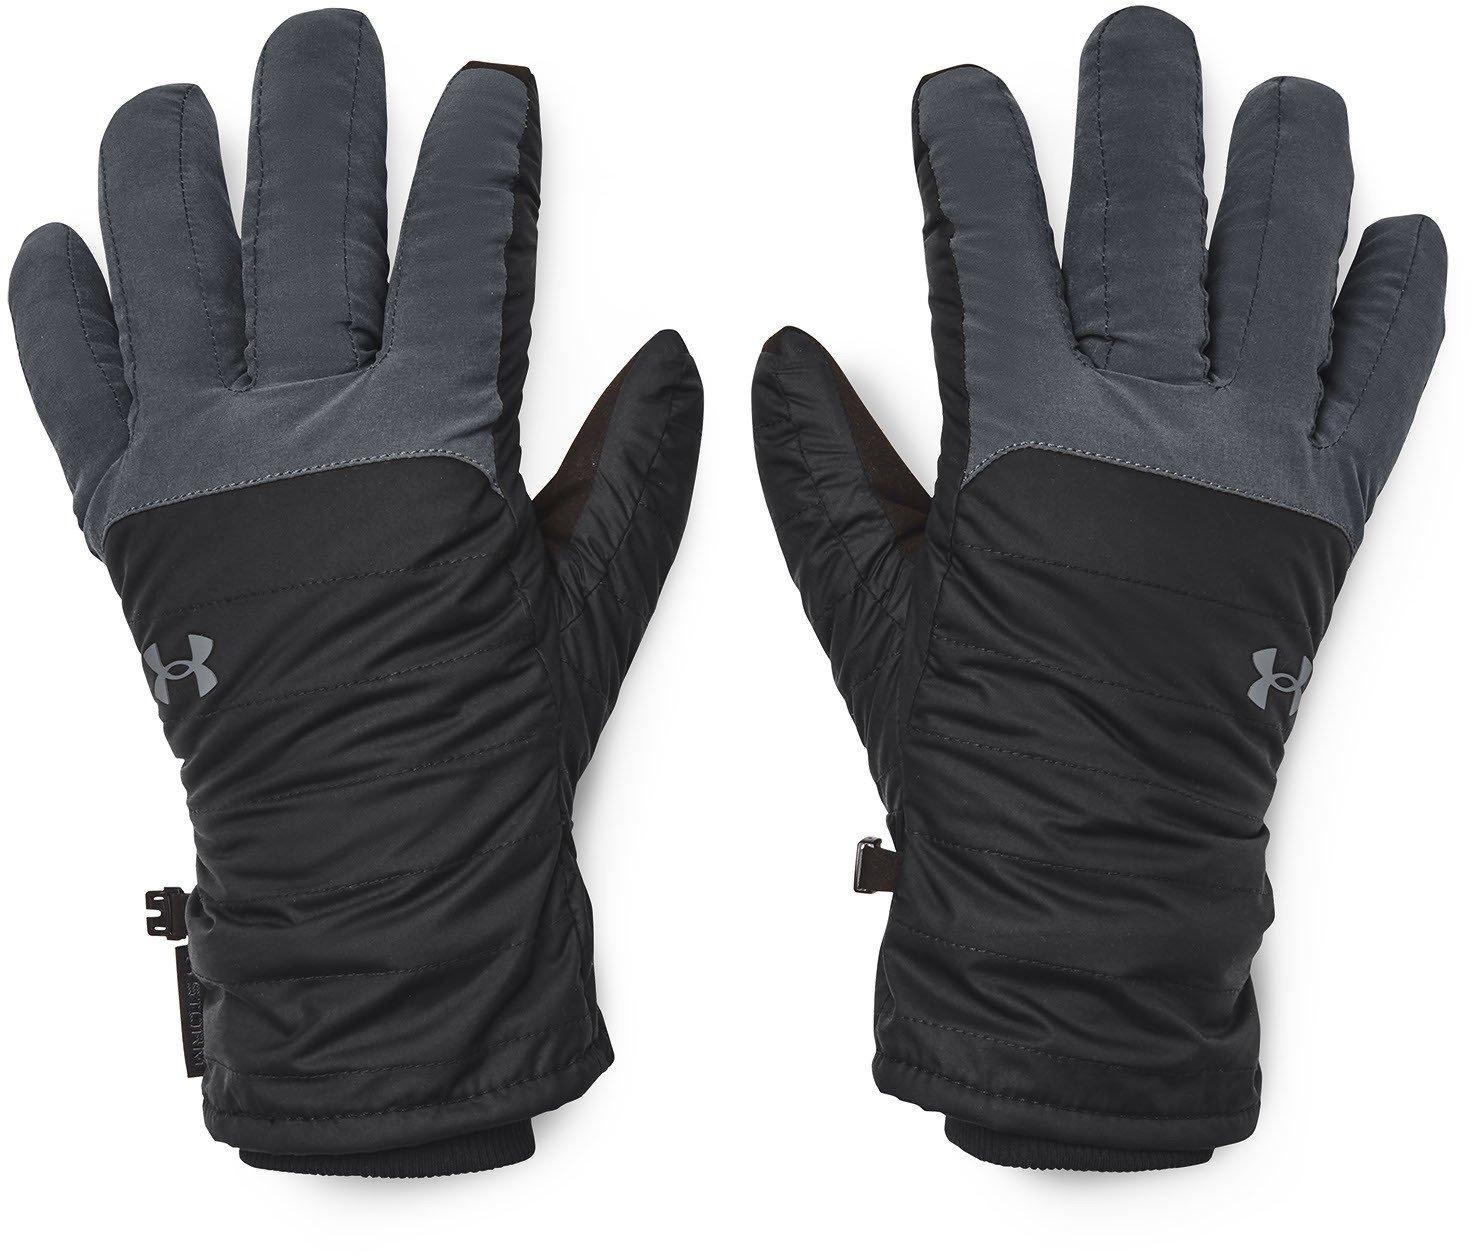 Under Armour Storm Insulated Gloves-BLK XL